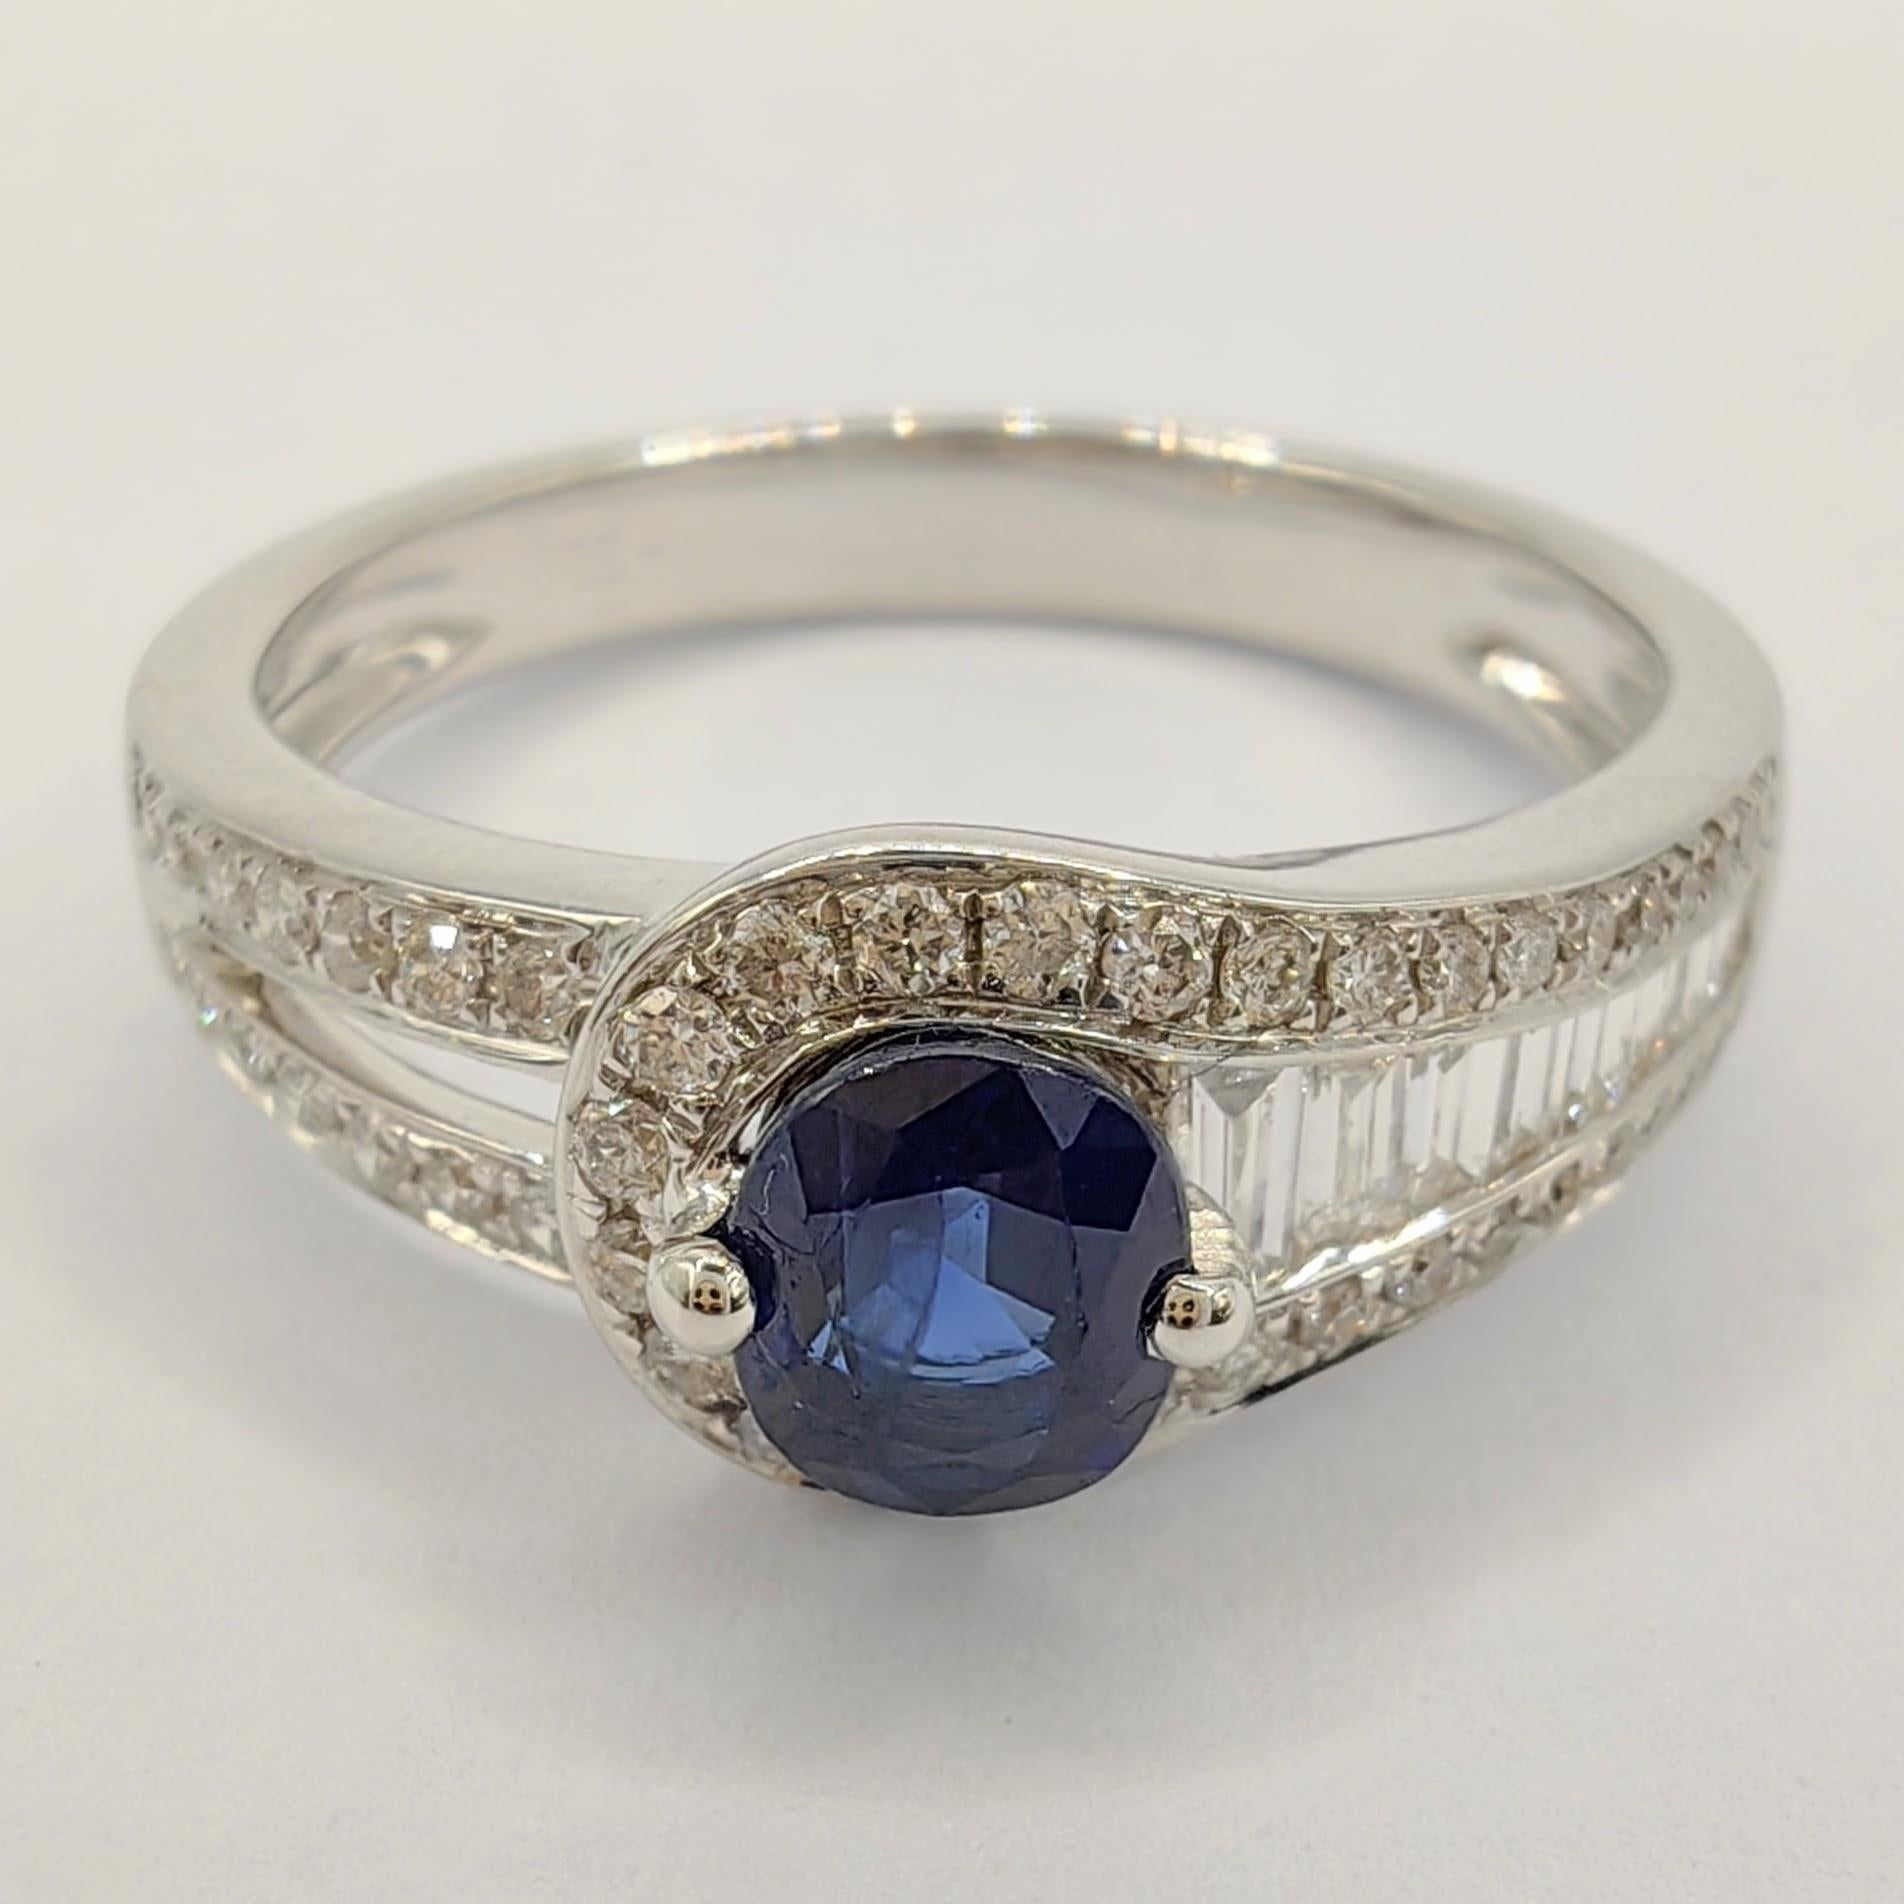 Introducing our stunning Oval-cut Blue Sapphire Tapered Baguette Diamond Ring, a piece of jewelry that perfectly balances simplicity and elegance. The centerpiece of this ring is a beautiful 0.65ct oval-cut blue sapphire, which is surrounded by a